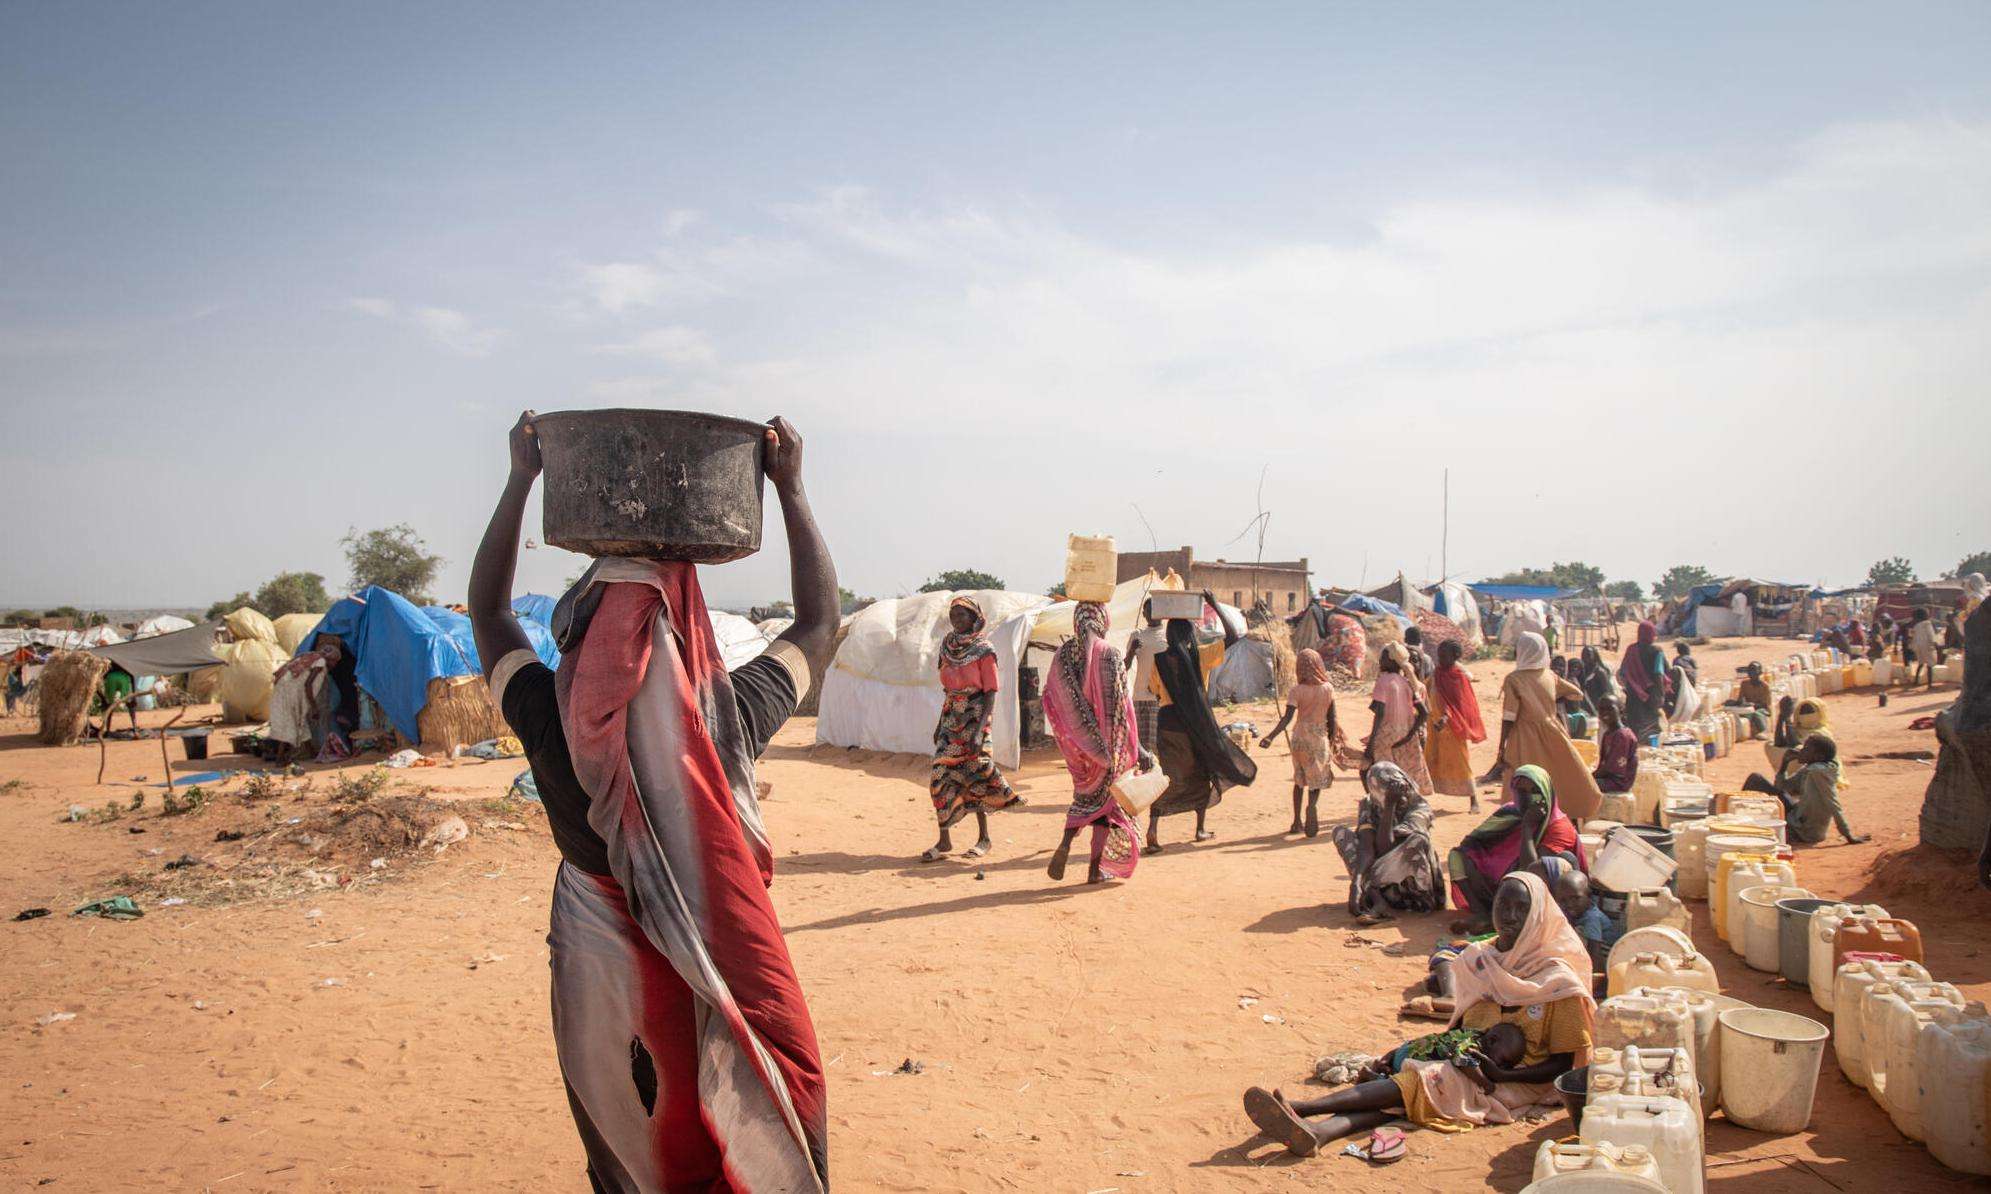 Sudanese refugees fetch water in a refugee camp in Chad.